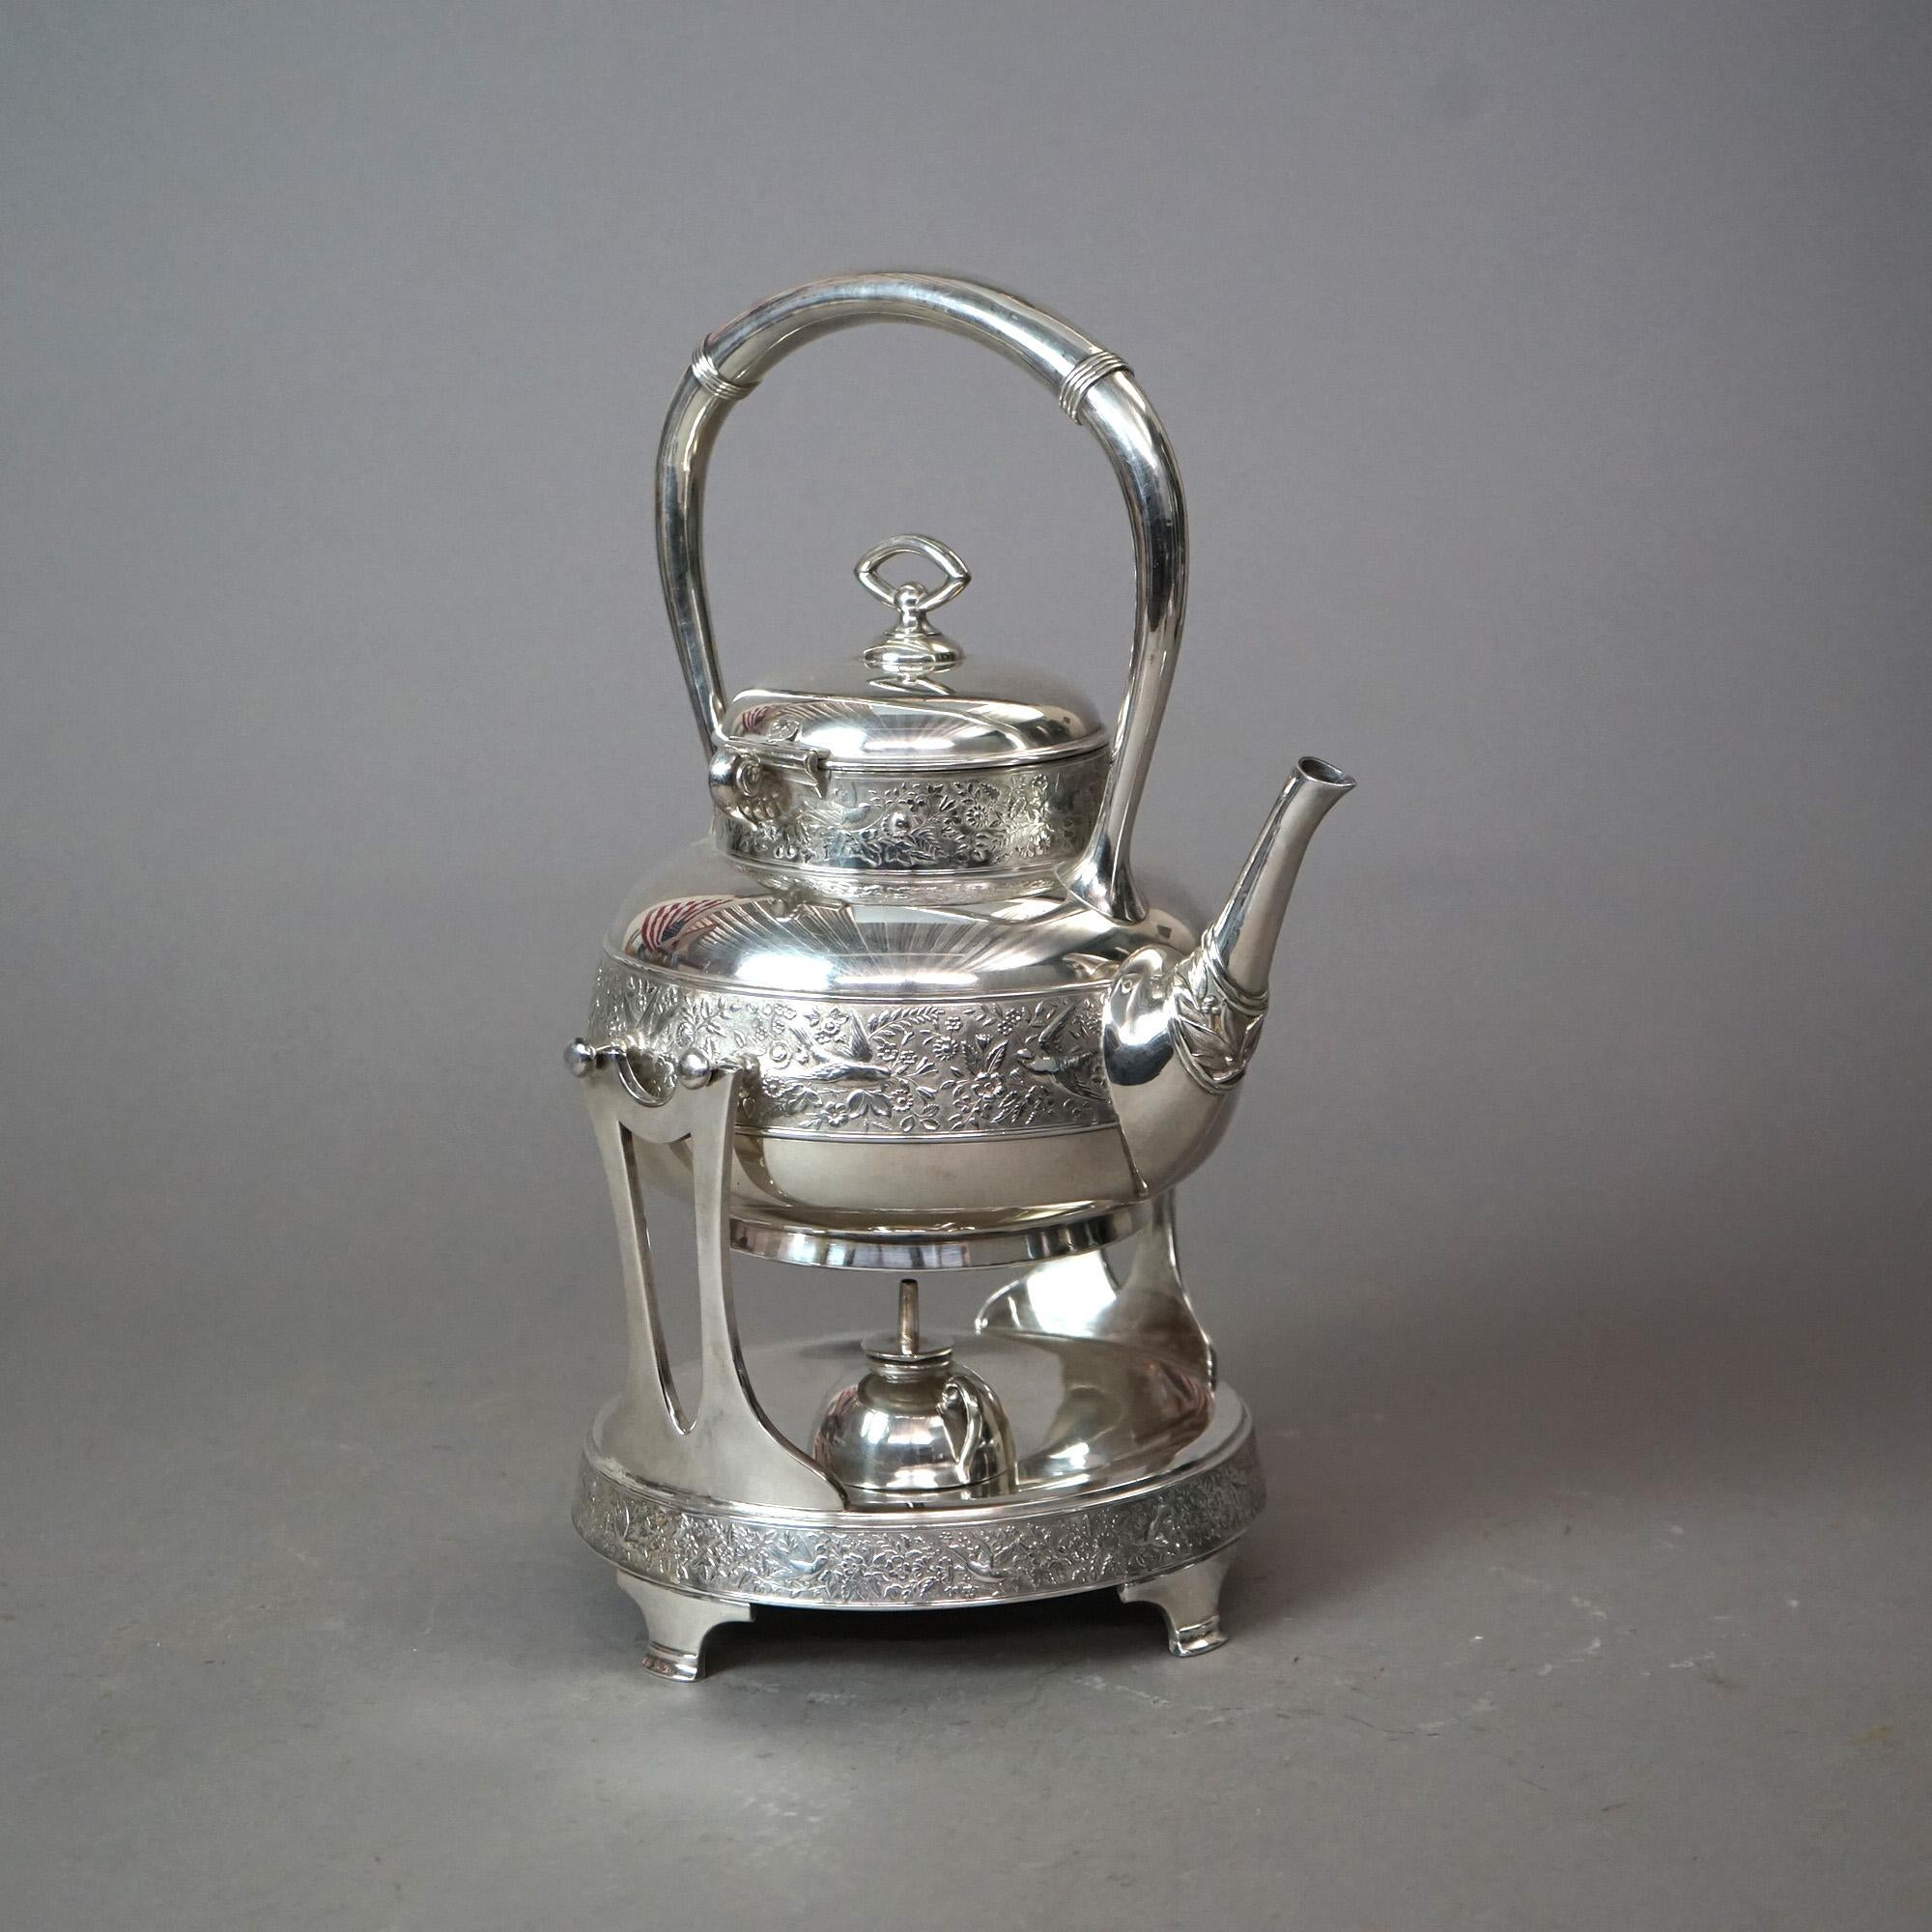 Aesthetic Movement Antique Rogers Aesthetic Silver Plated Tilting Teapot & Stand with Birds C1870 For Sale